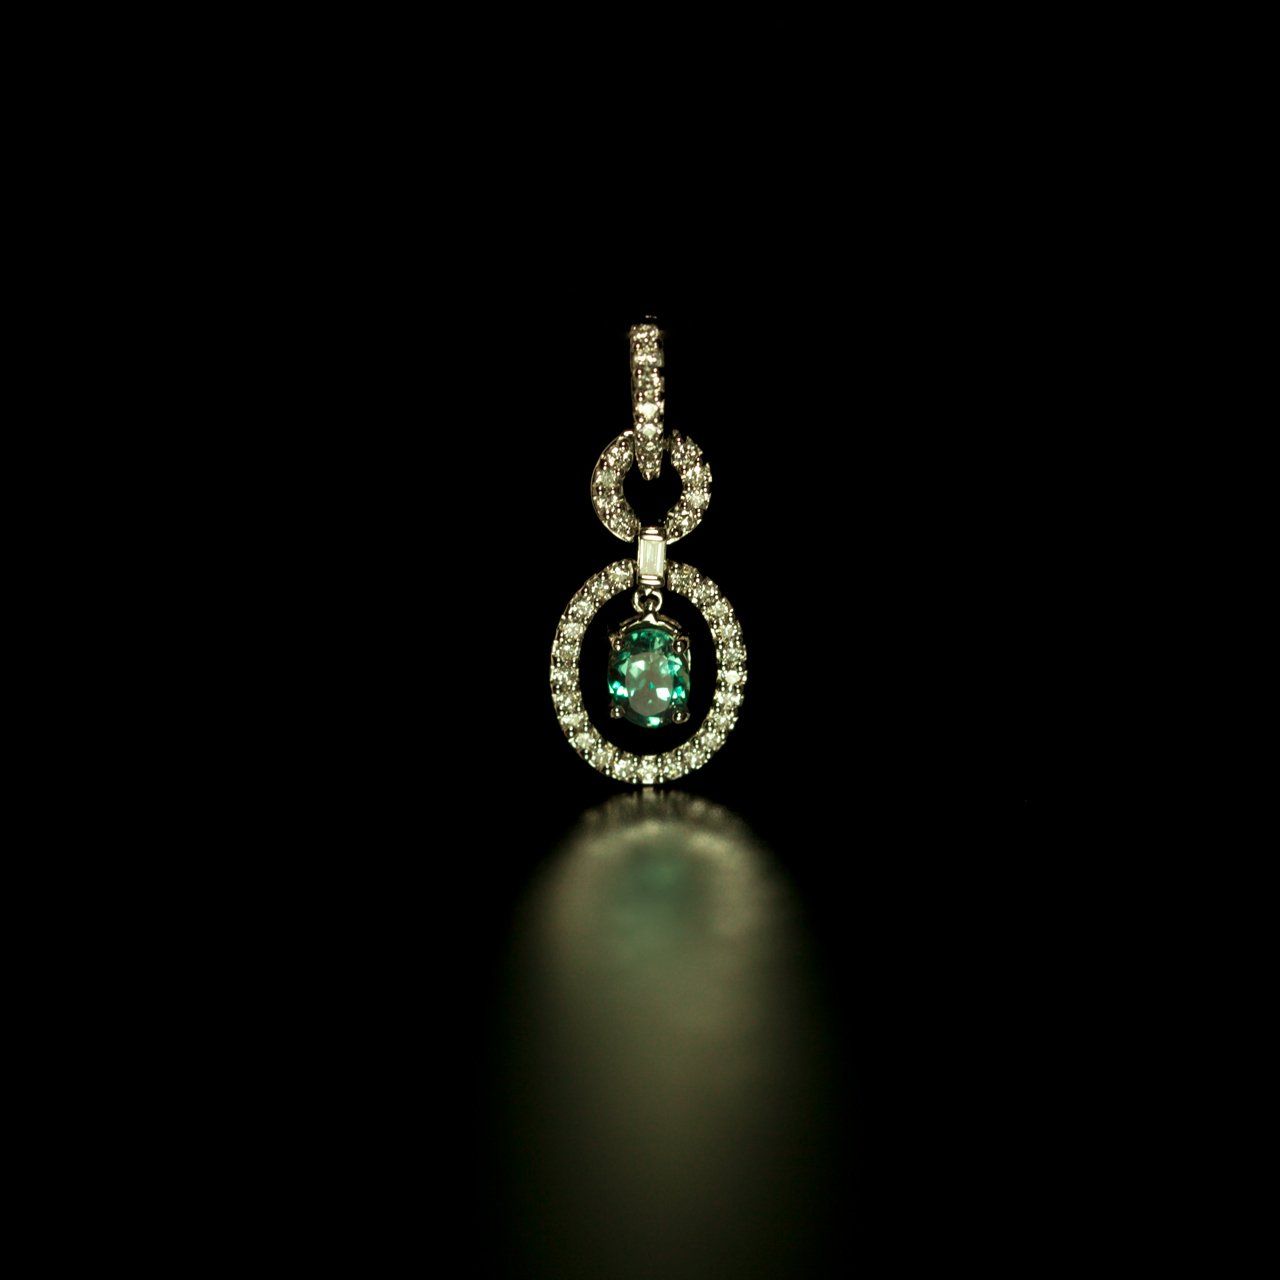 0.39ct alexandrite set in an 18k white gold pendant, illuminated to show gemstone clarity